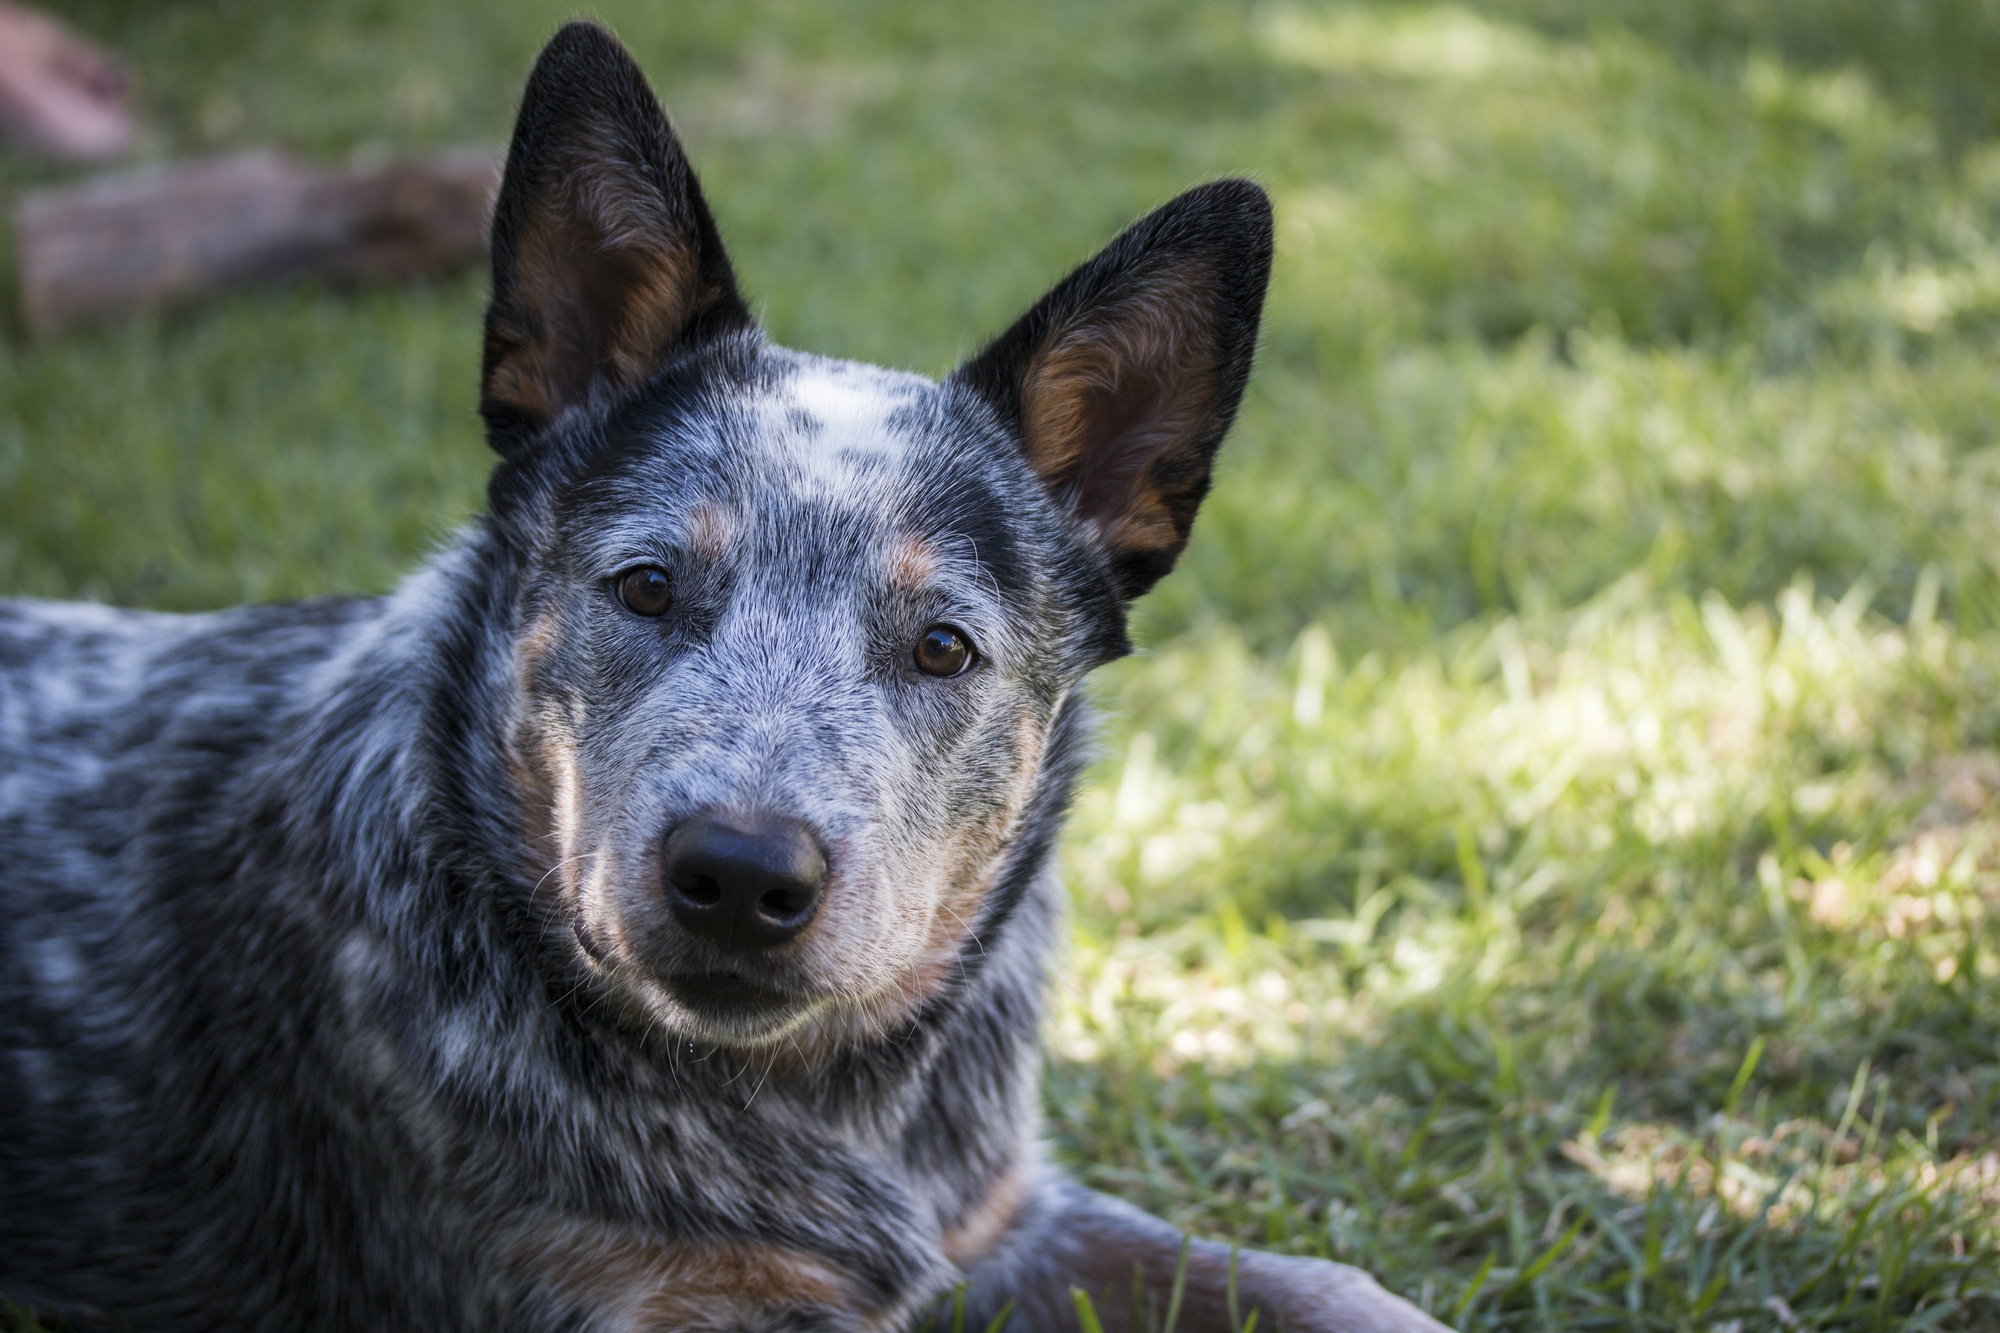 How to stop an Australian Cattle Dog from biting?